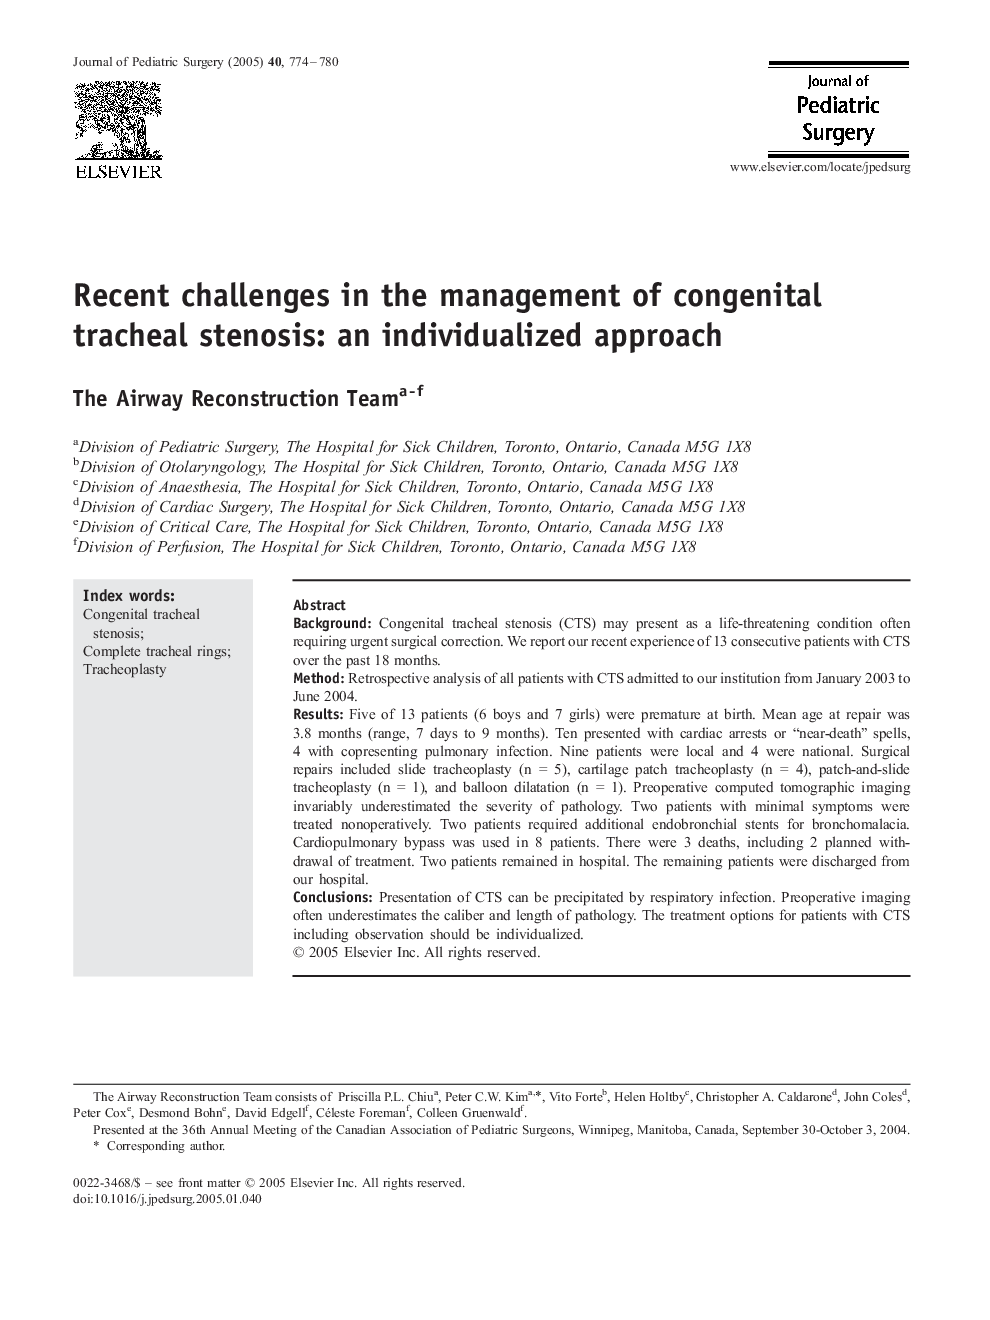 Recent challenges in the management of congenital tracheal stenosis: an individualized approach